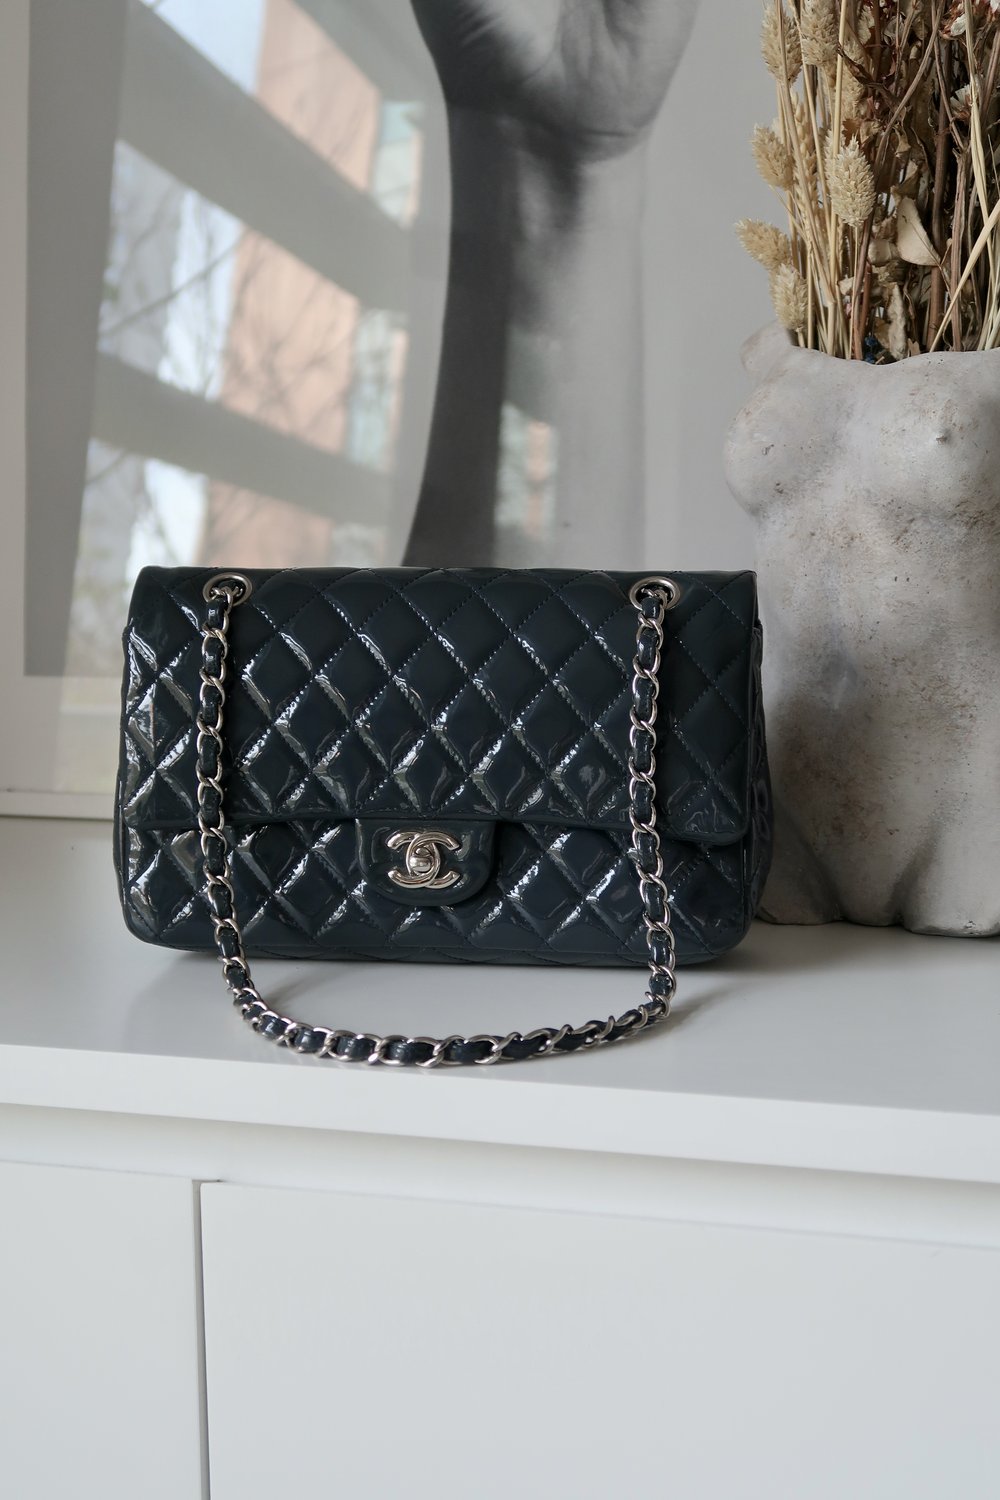 Chanel Dark Navy Patent Classic Flap Bag — Blaise Ruby Loves